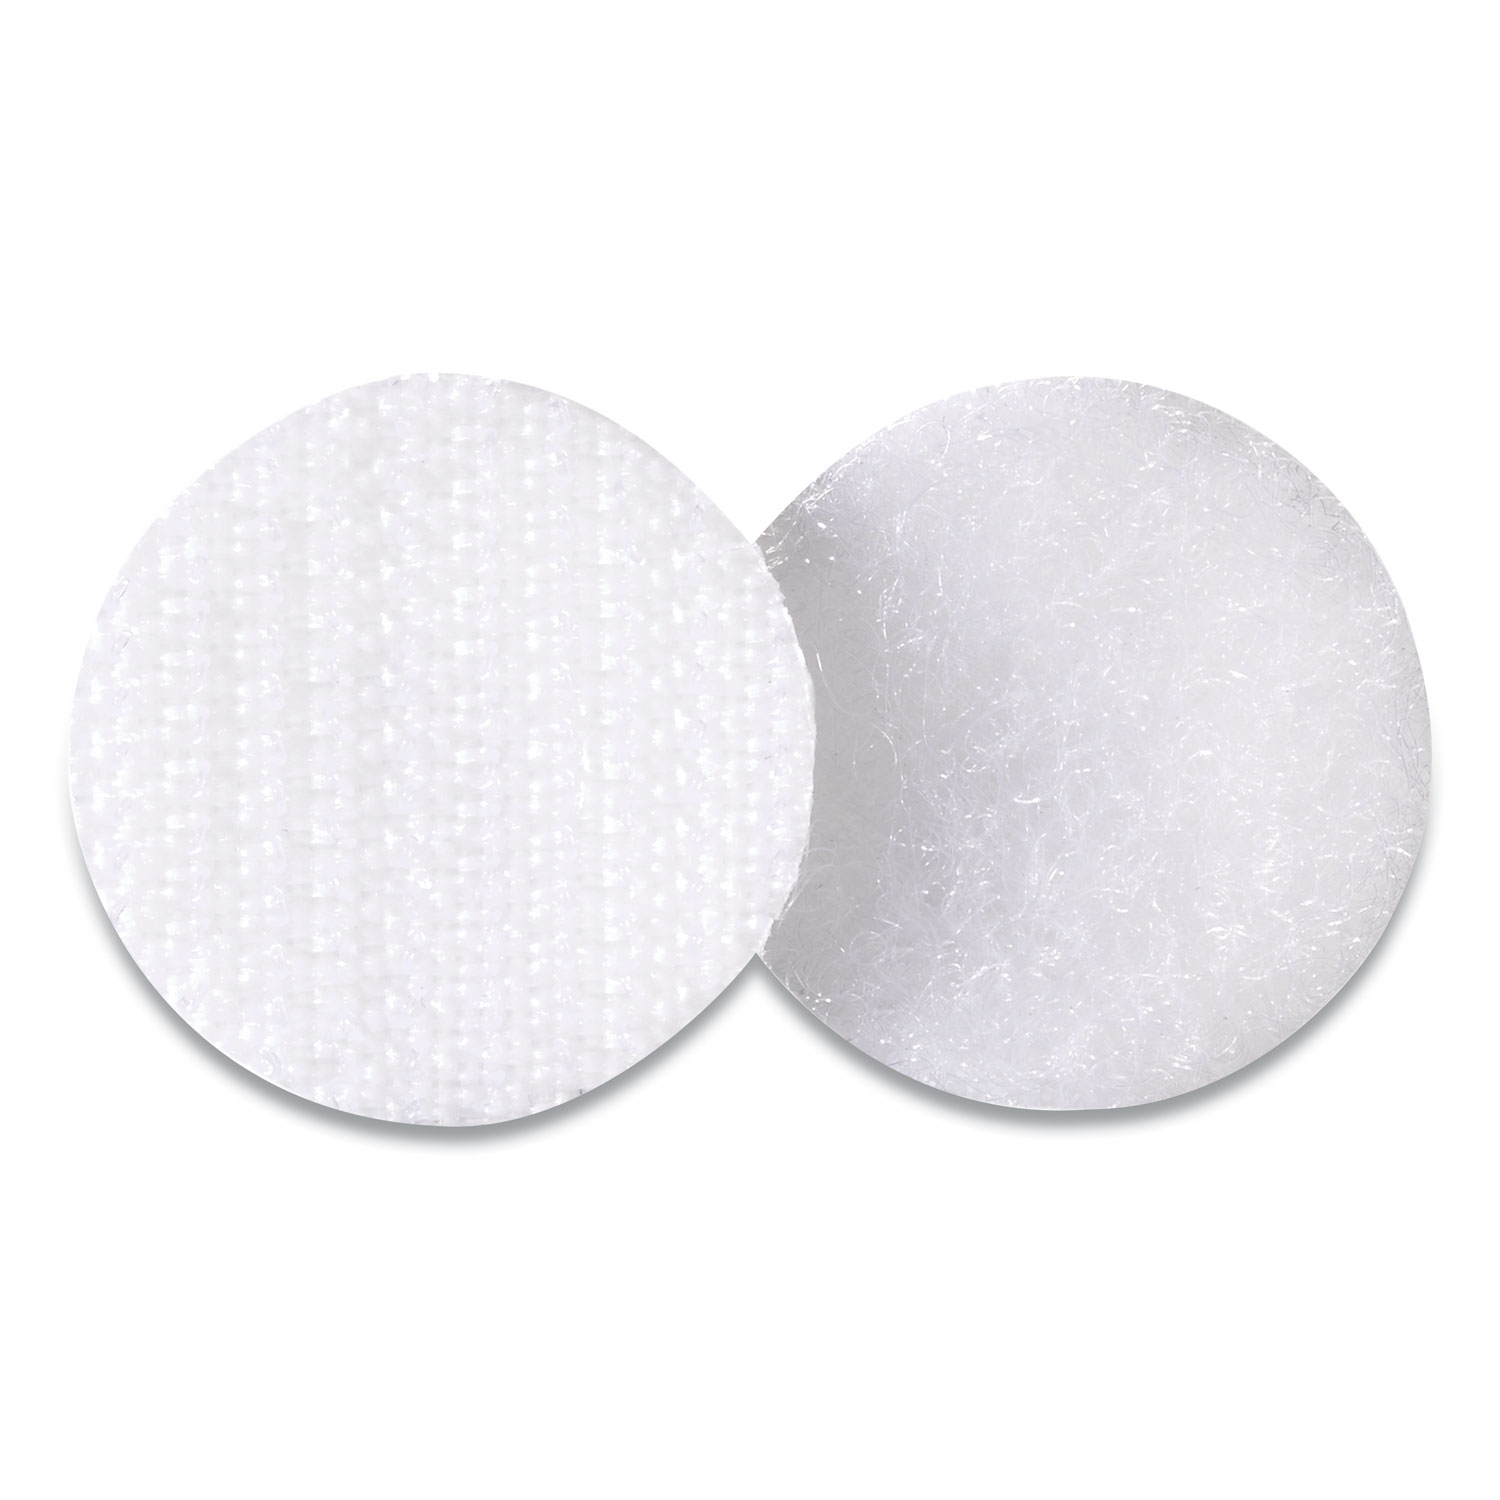 VELCRO® Sticky Back Fasteners - 16.67 yd Length x 0.75 Width - 1 / Roll -  White - Filo CleanTech